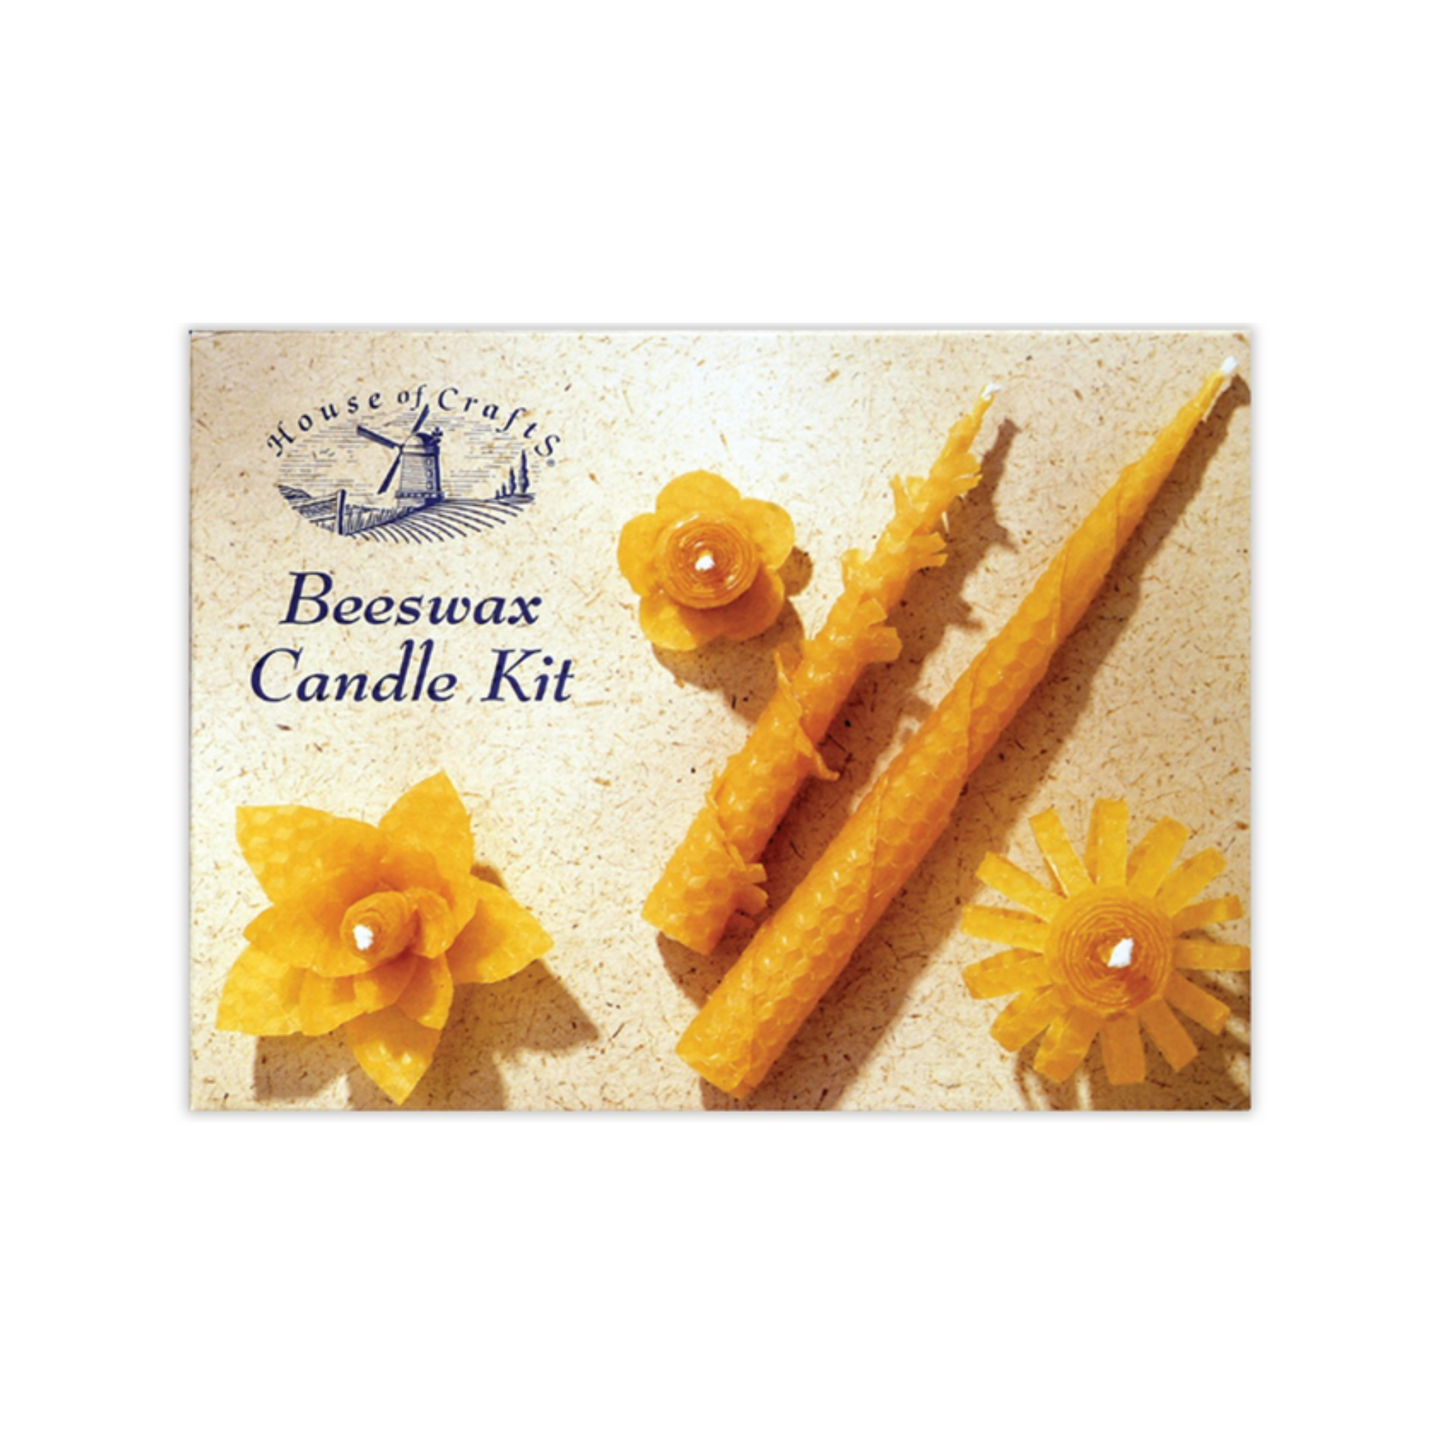 Beeswax Candle Kit